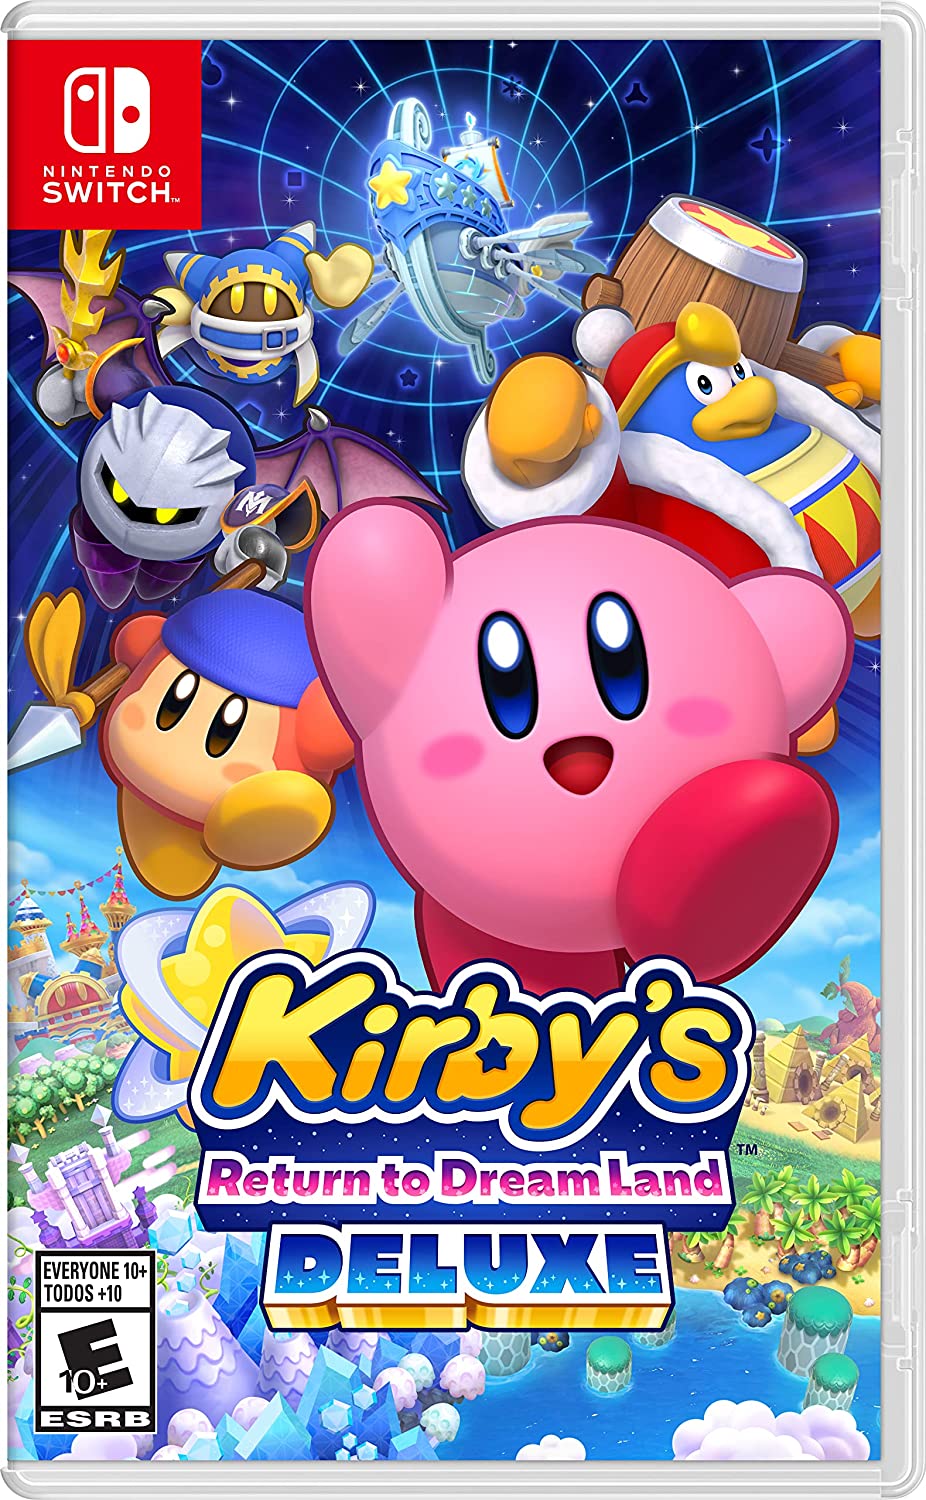 Kirby's Return to Dream Land Deluxe game artwork.